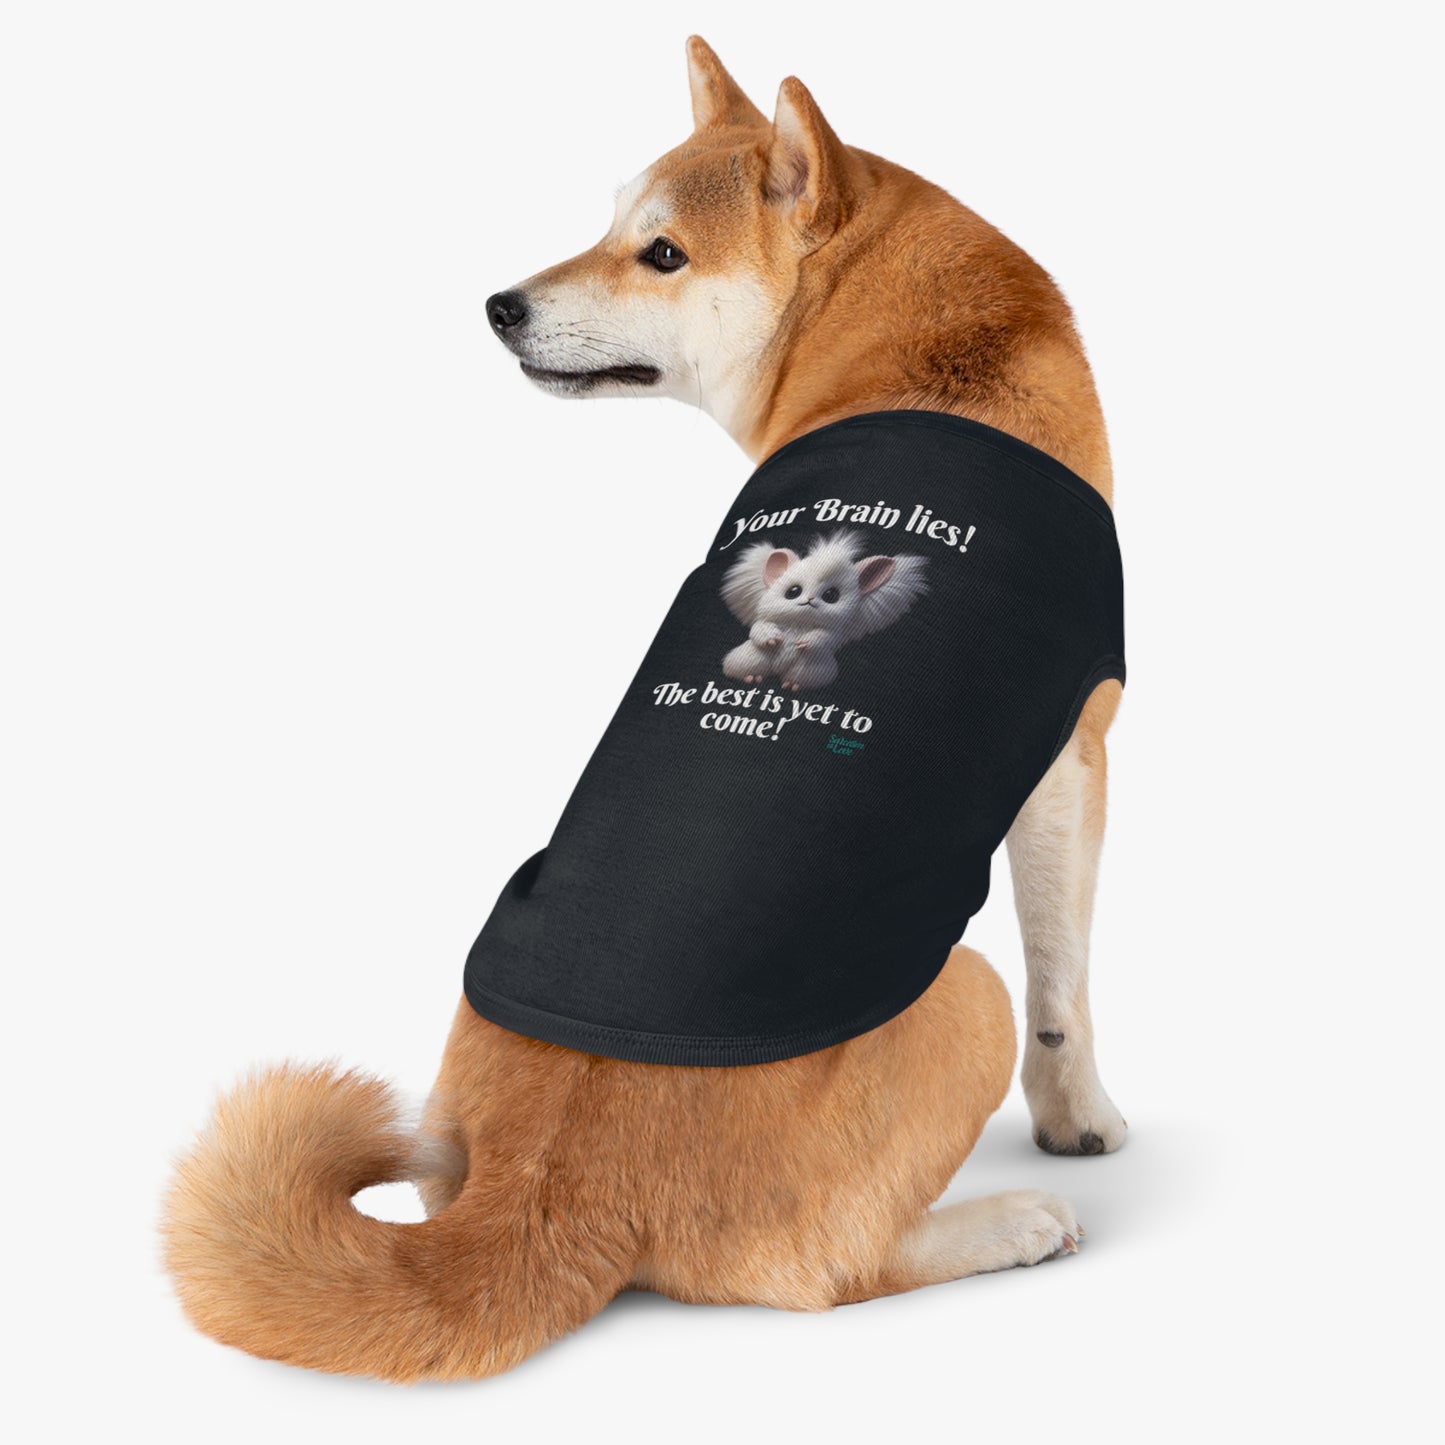 Your Brain Lies, the Best is Yet to Come" Pet Tank Top - Inspire and Encourage Your Pet